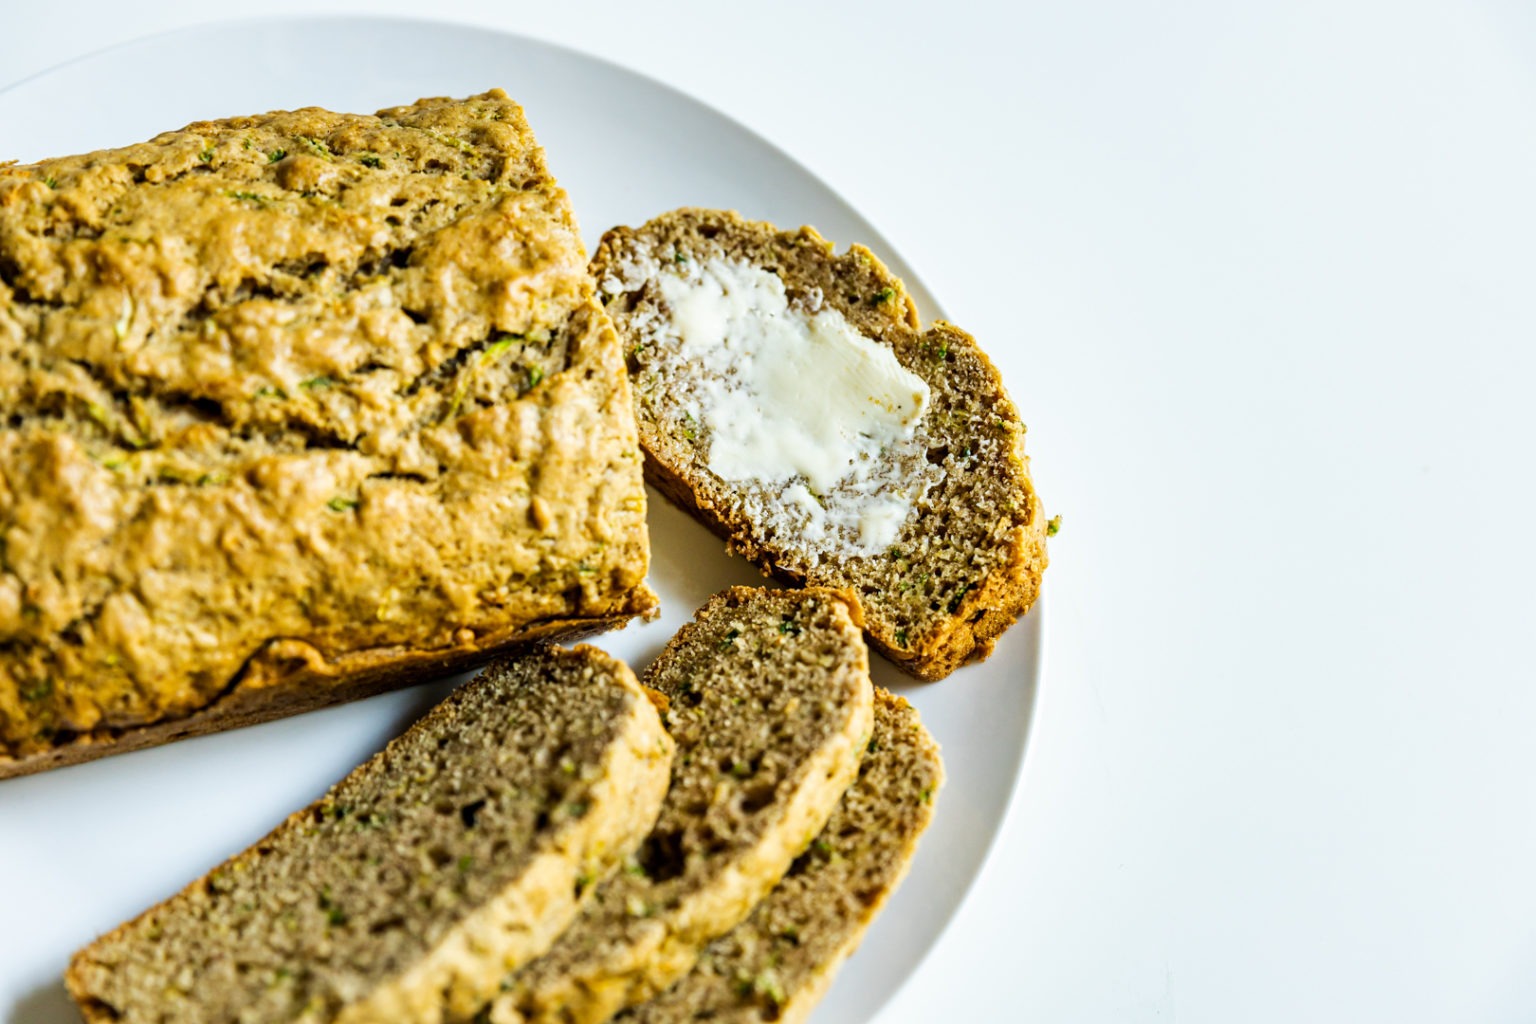 https://blog.thermoworks.com/wp-content/uploads/2020/08/Zucchini_Bread_Compressed-47-1536x1024.jpg